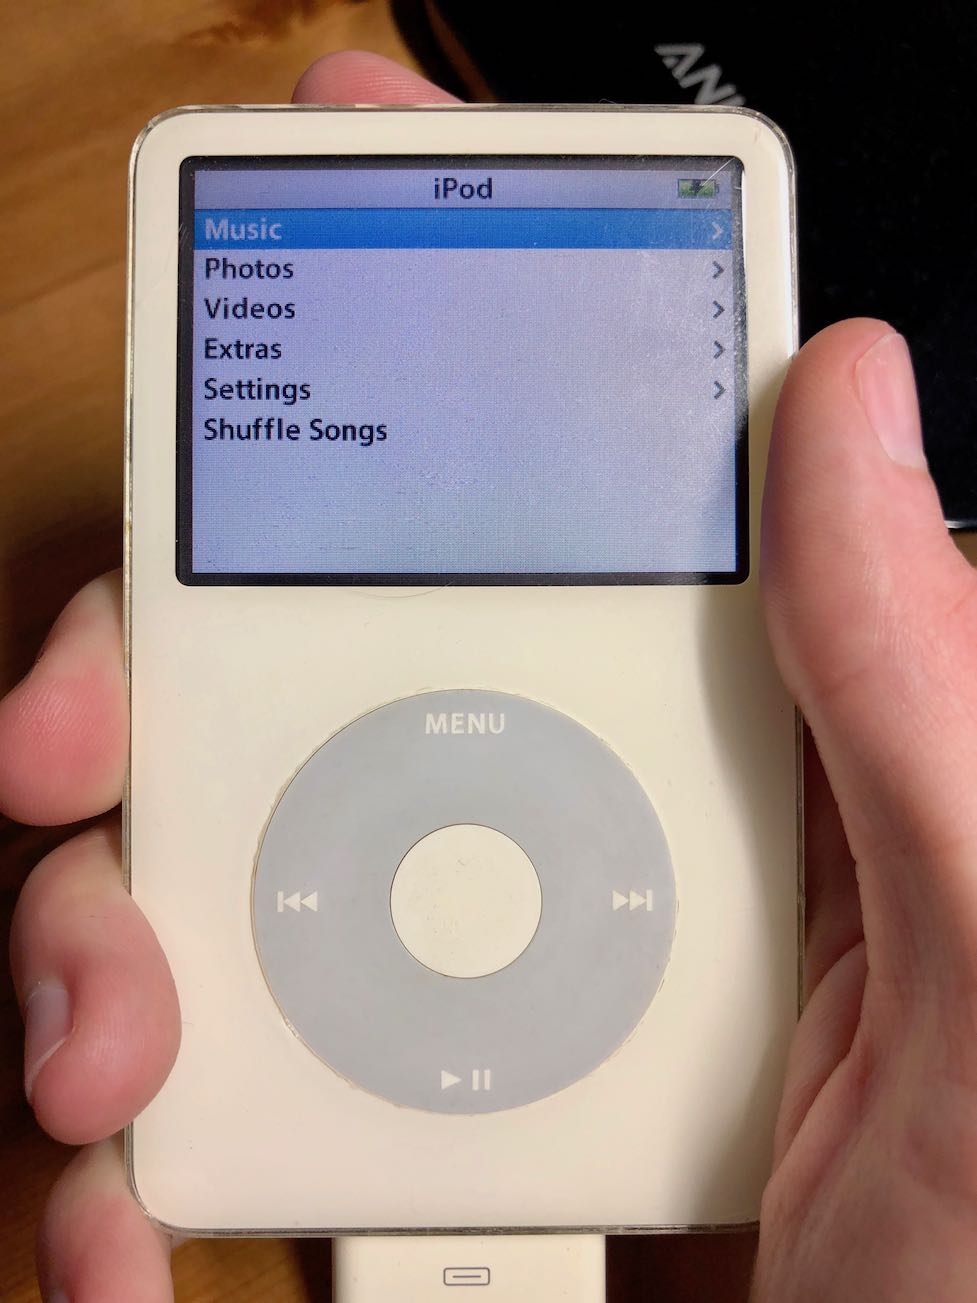 My old iPod Video's aged, dim display and yellowed white plastic front